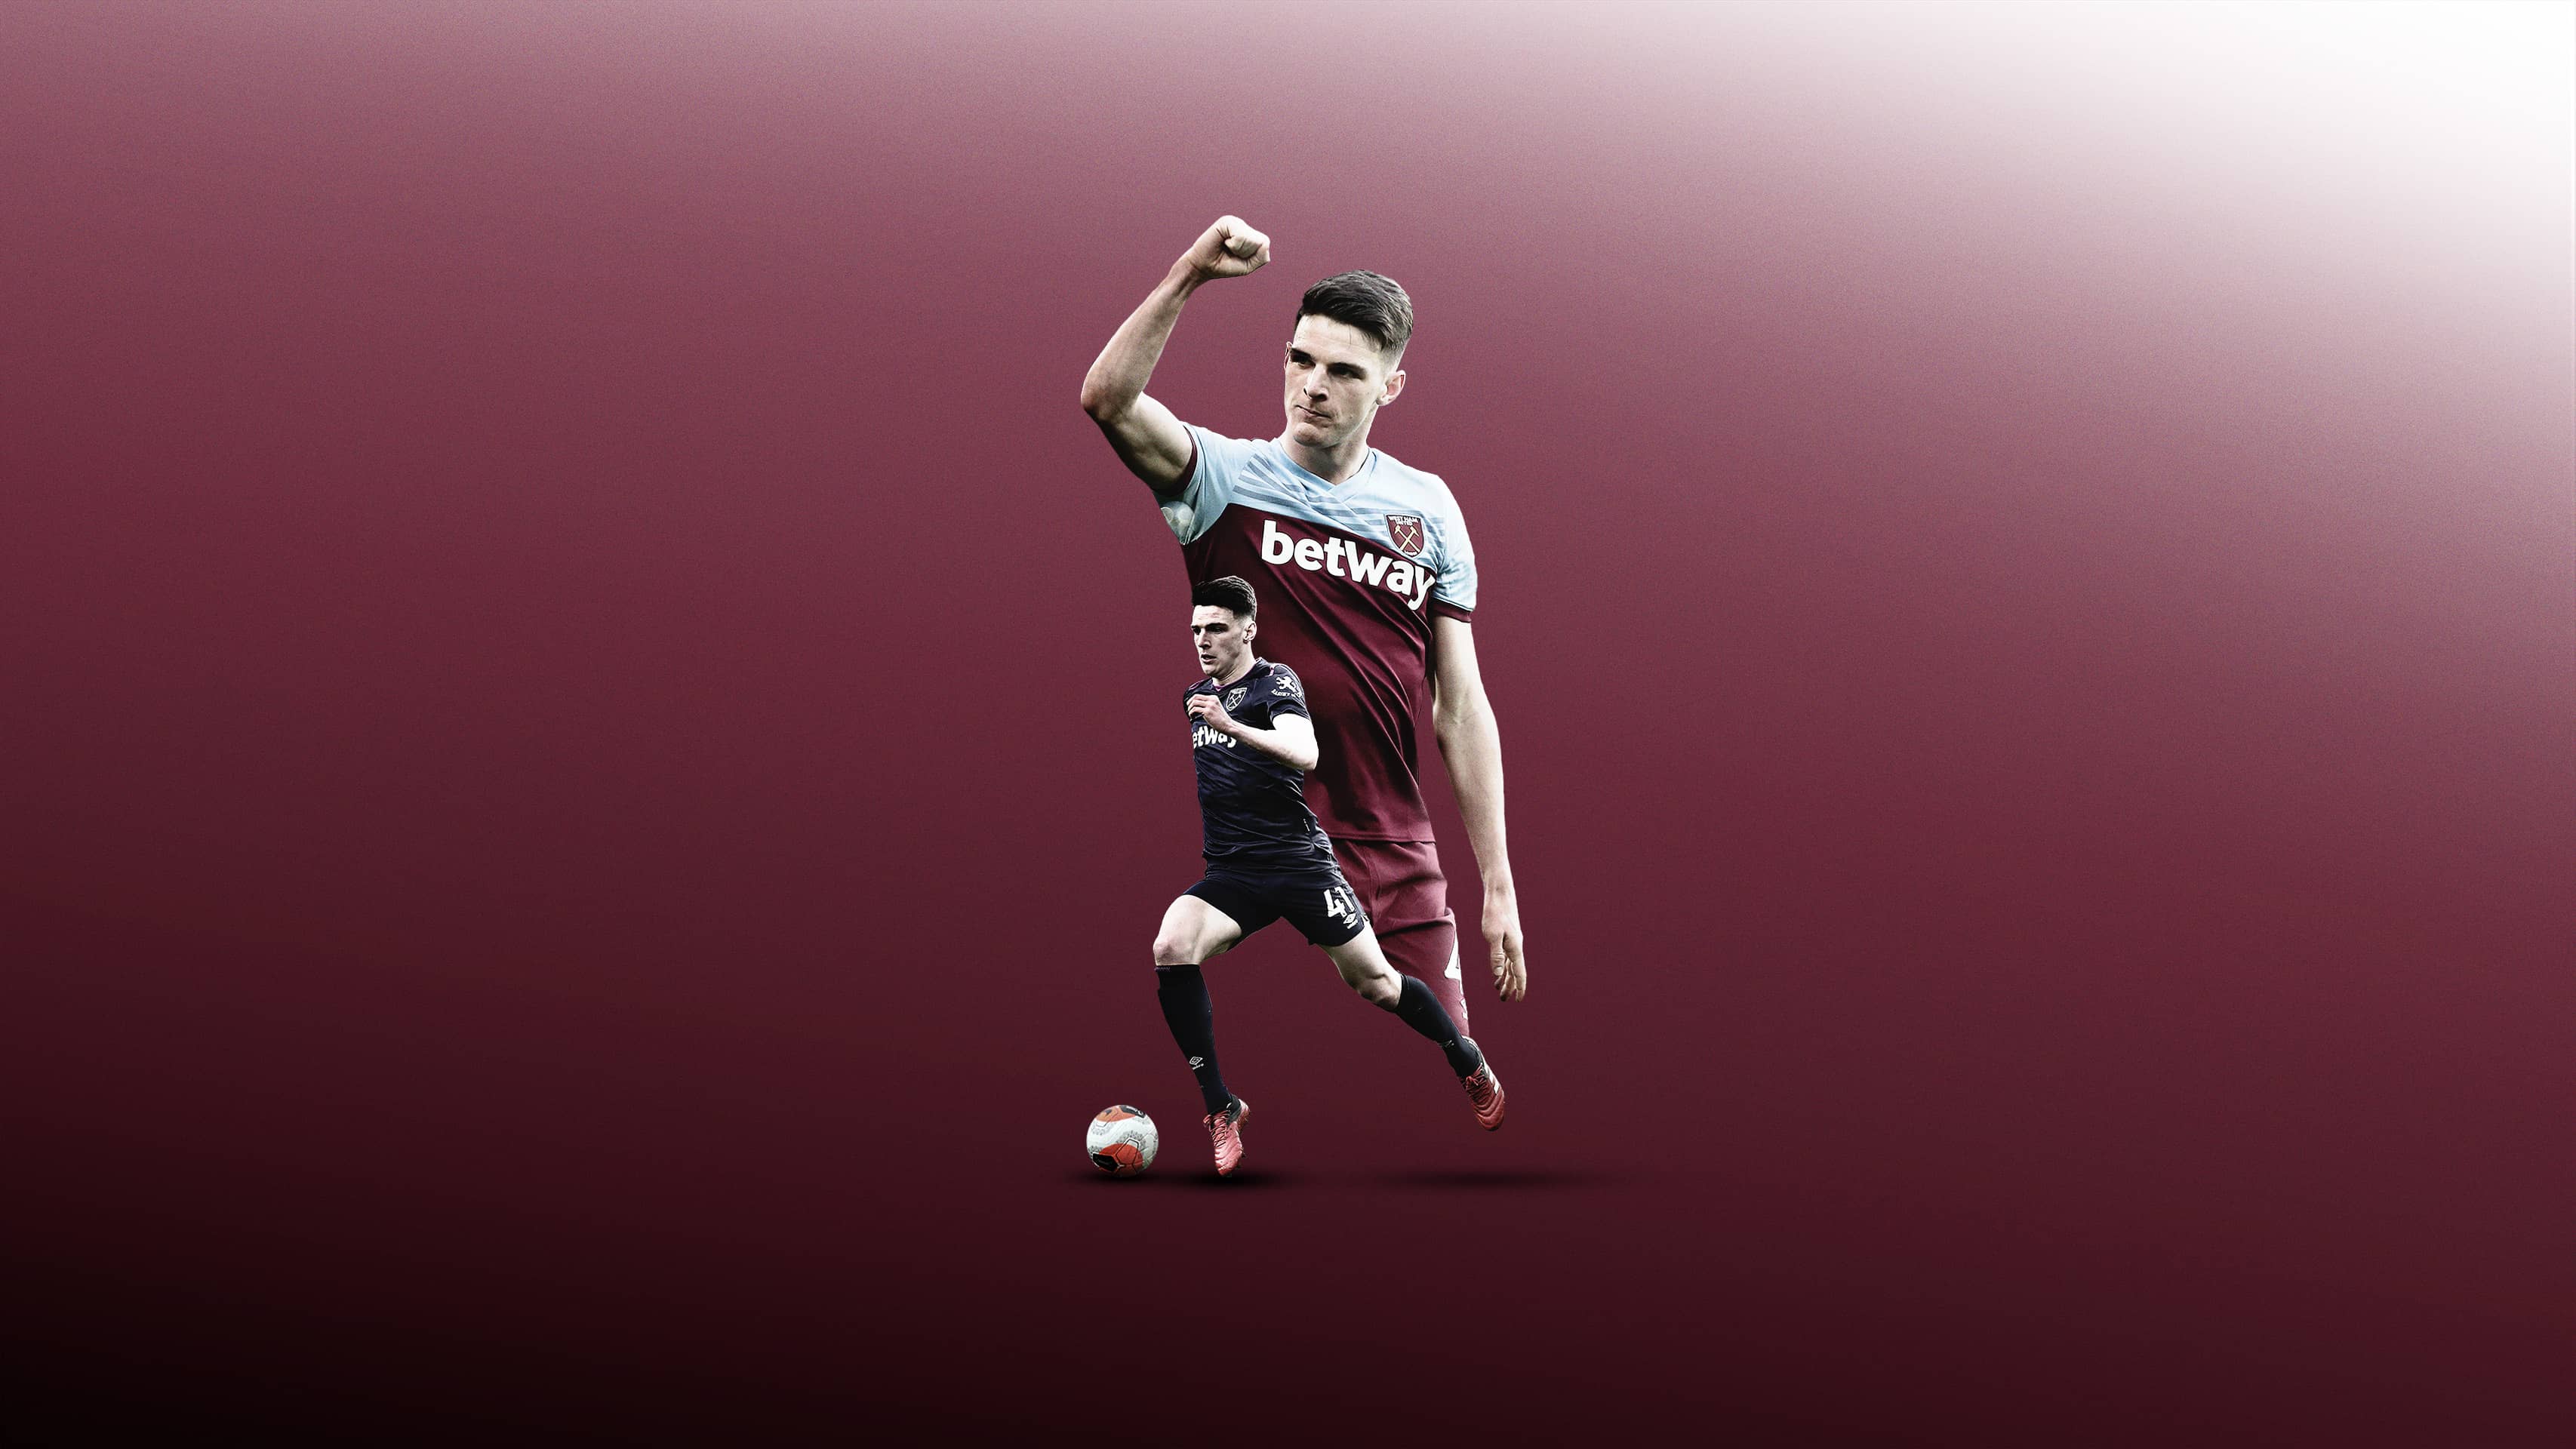 WallpaperWednesday: Rice, Diop and Longhurst wallpaper for your phone or desktop!. West Ham United